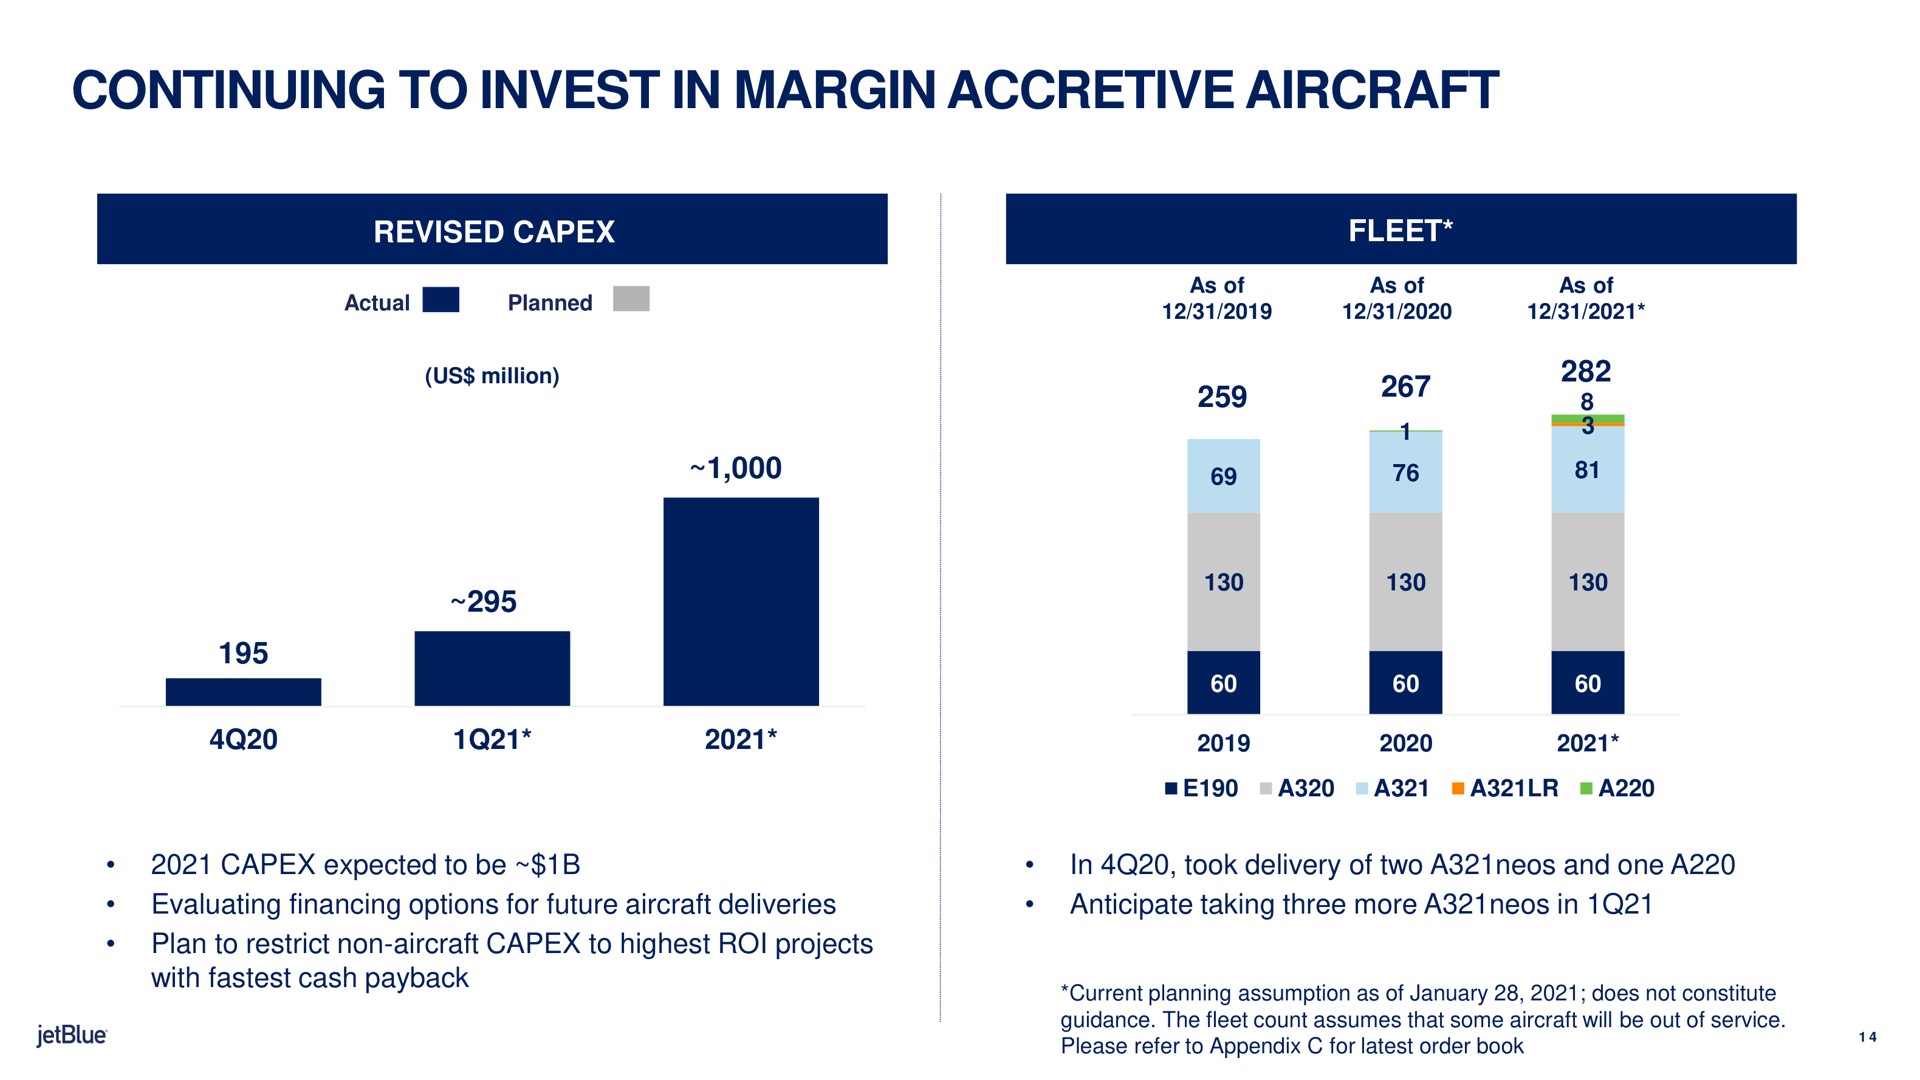 continuing to invest in margin accretive aircraft revised fleet me a a a a | jetBlue